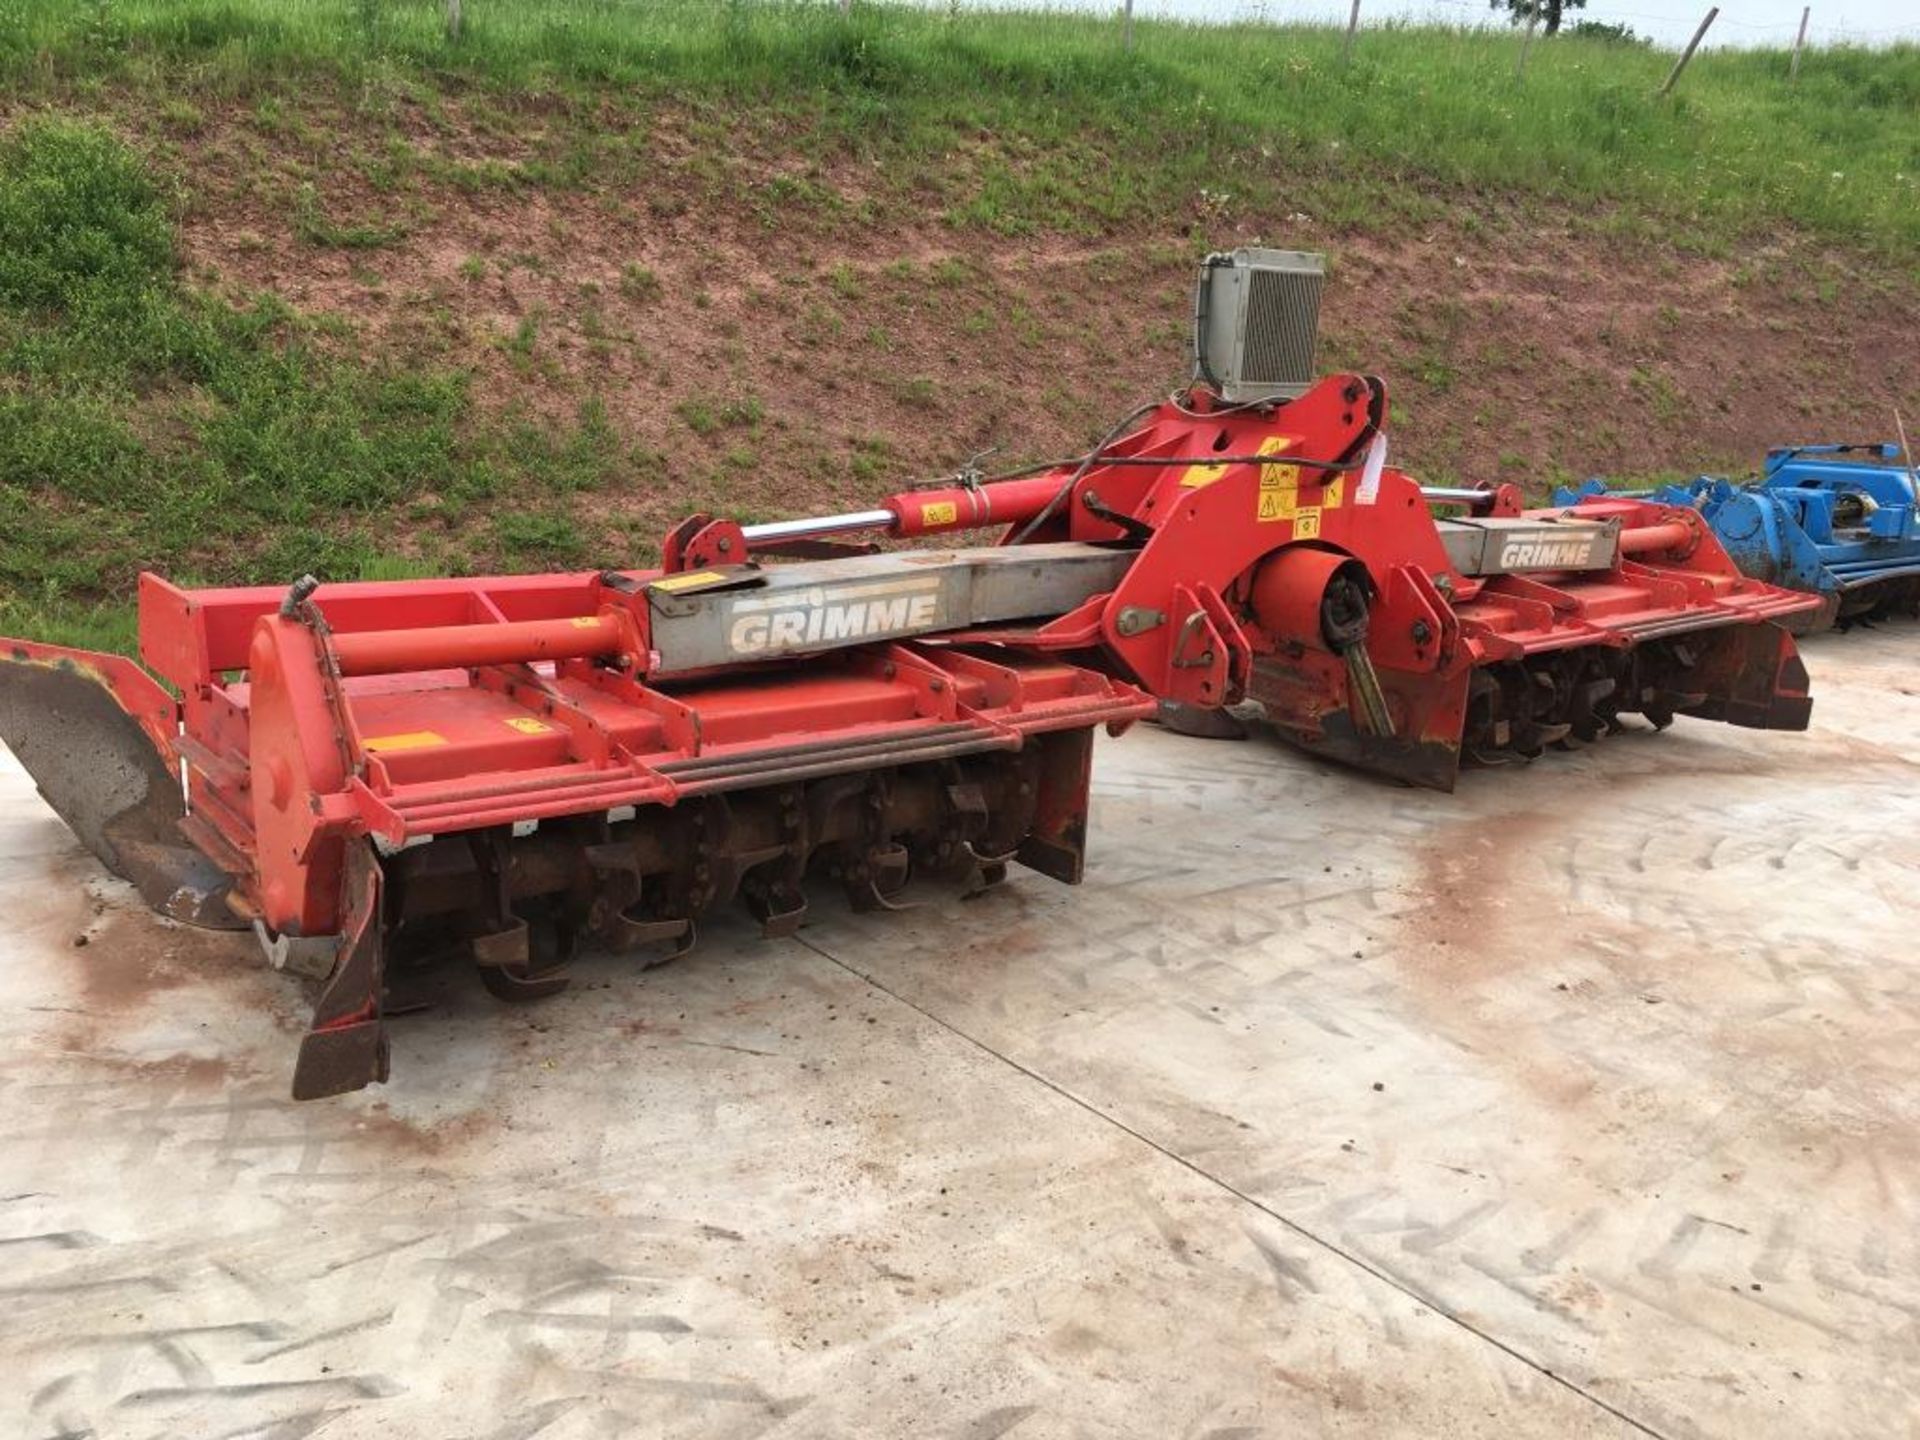 Grimme RT6000, with triple bed CT6000 tillers, serial number: 60000043 - Image 2 of 26